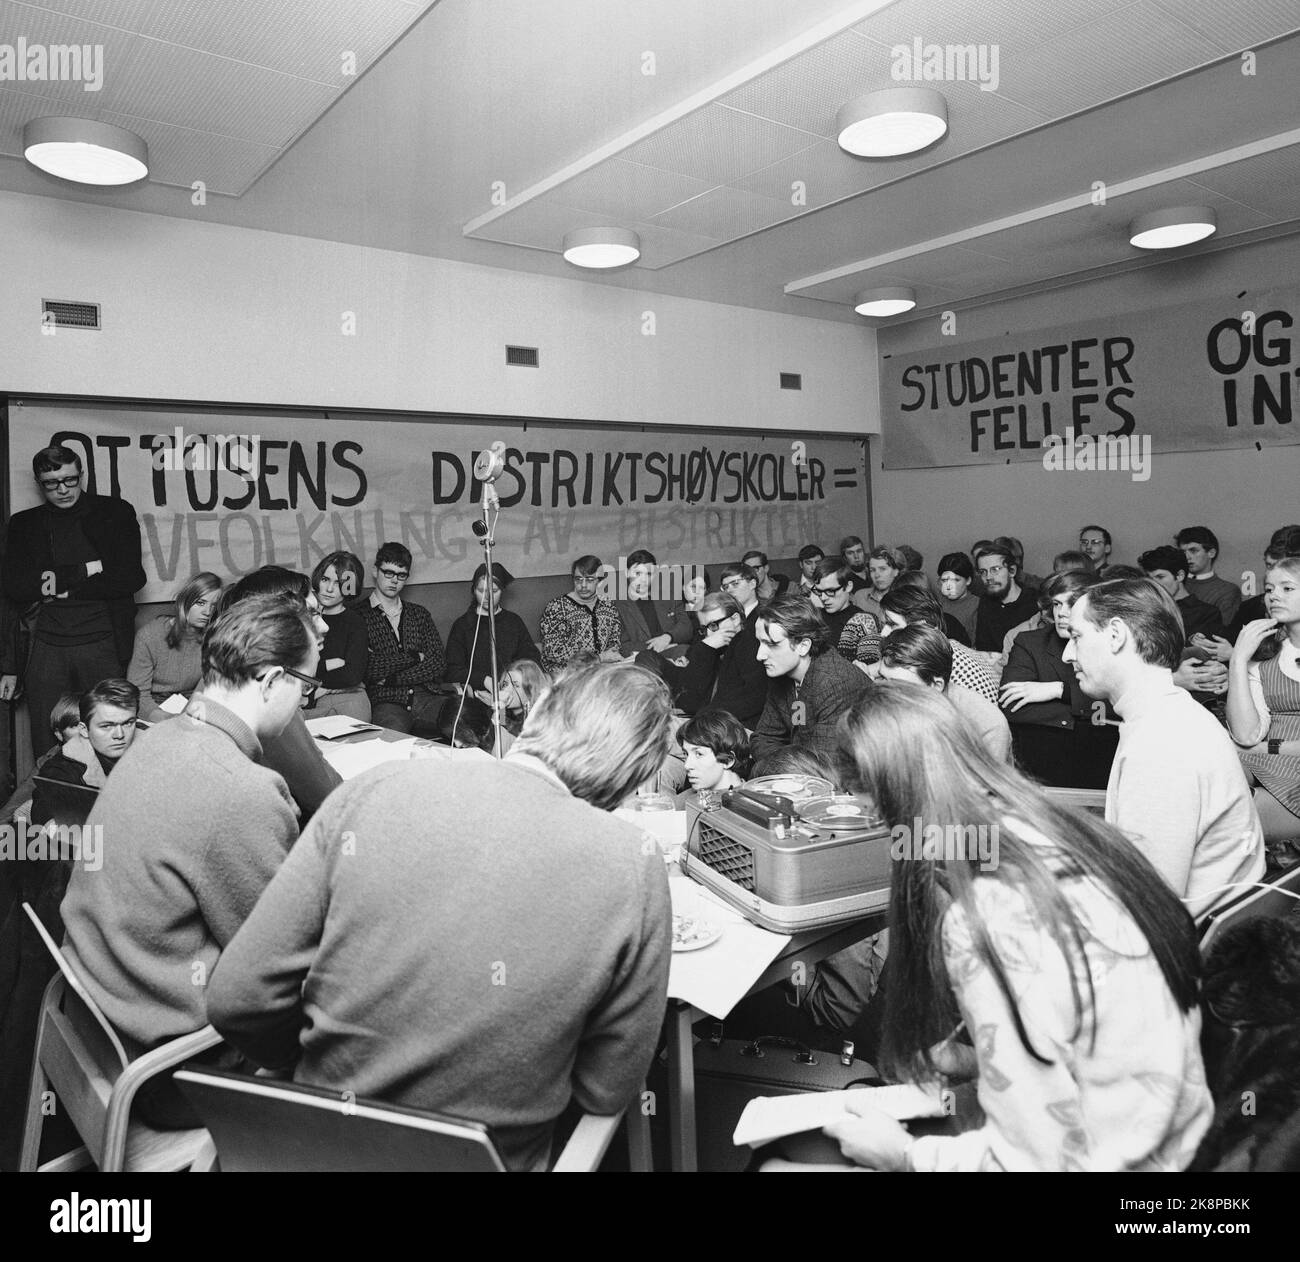 Oslo February 1, 1969. The philosophy students at Blindern in Oslo in full rebellion. The hall is filled to the congestion of the week on 'University, students, society', subjects that displaced the usual teaching at the institute. Photo: Ivar Aaserud / Current / NTB Stock Photo